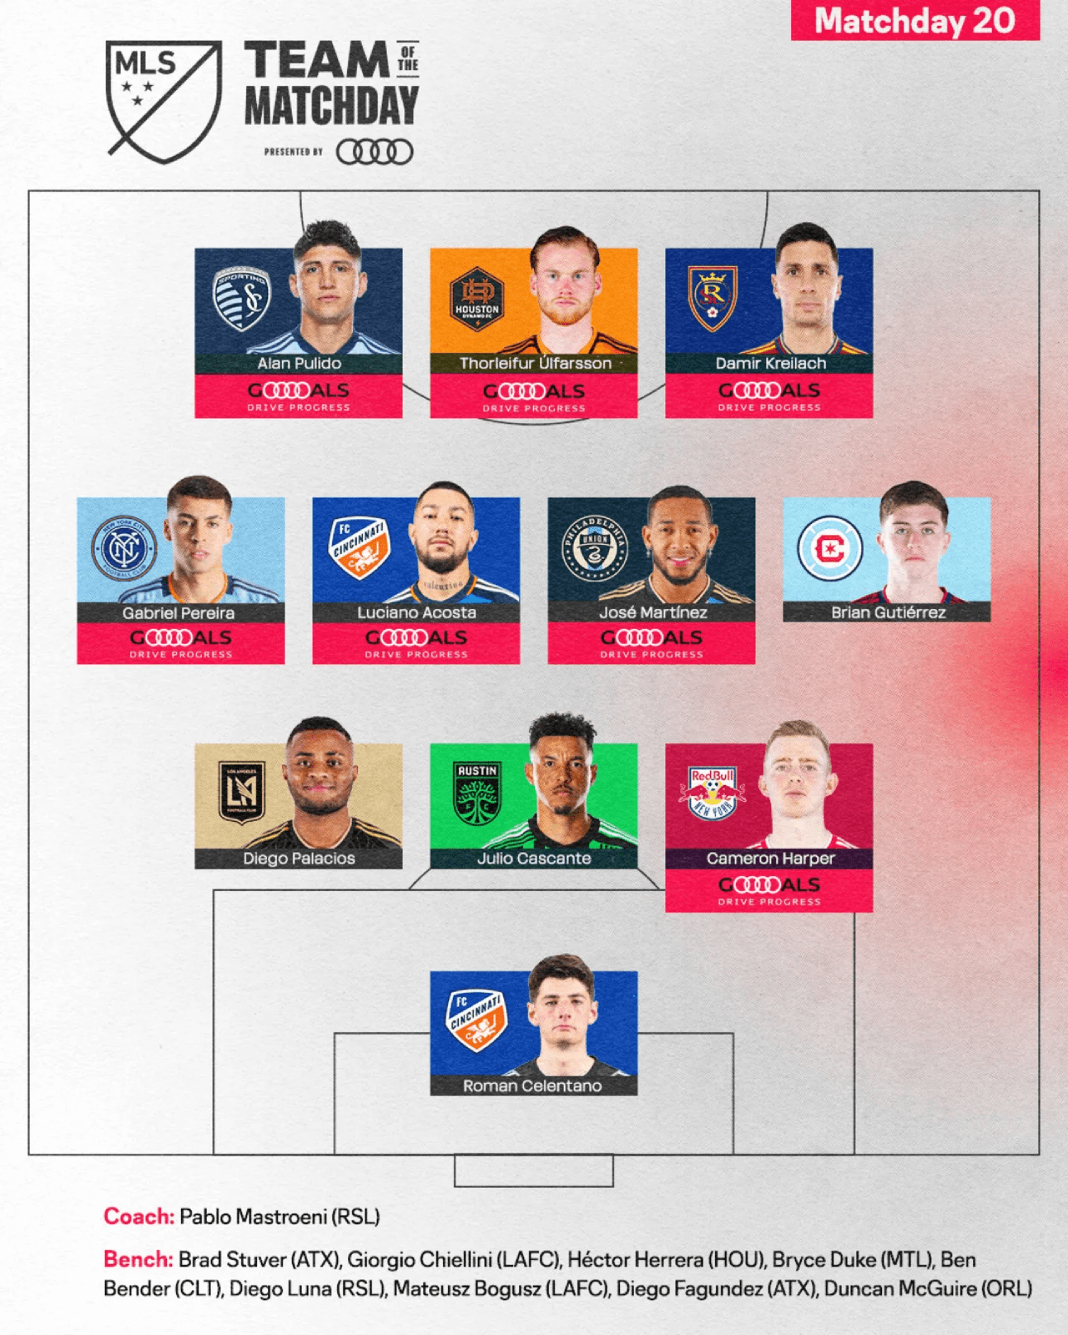 Team of the Matchday 20